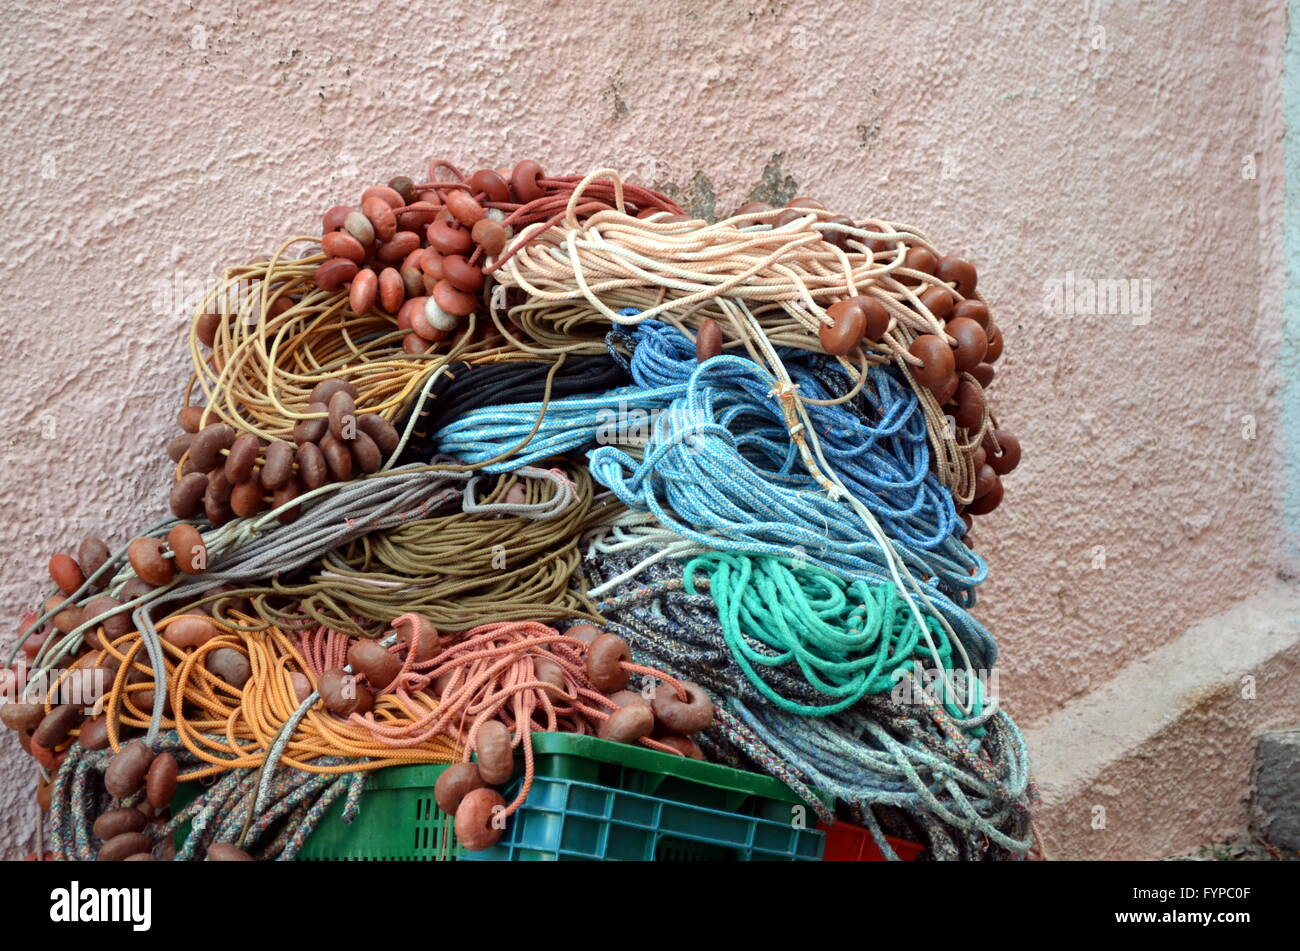 Image of fishing nets, floats, and rusty chain at seaside harbour Stock Photo